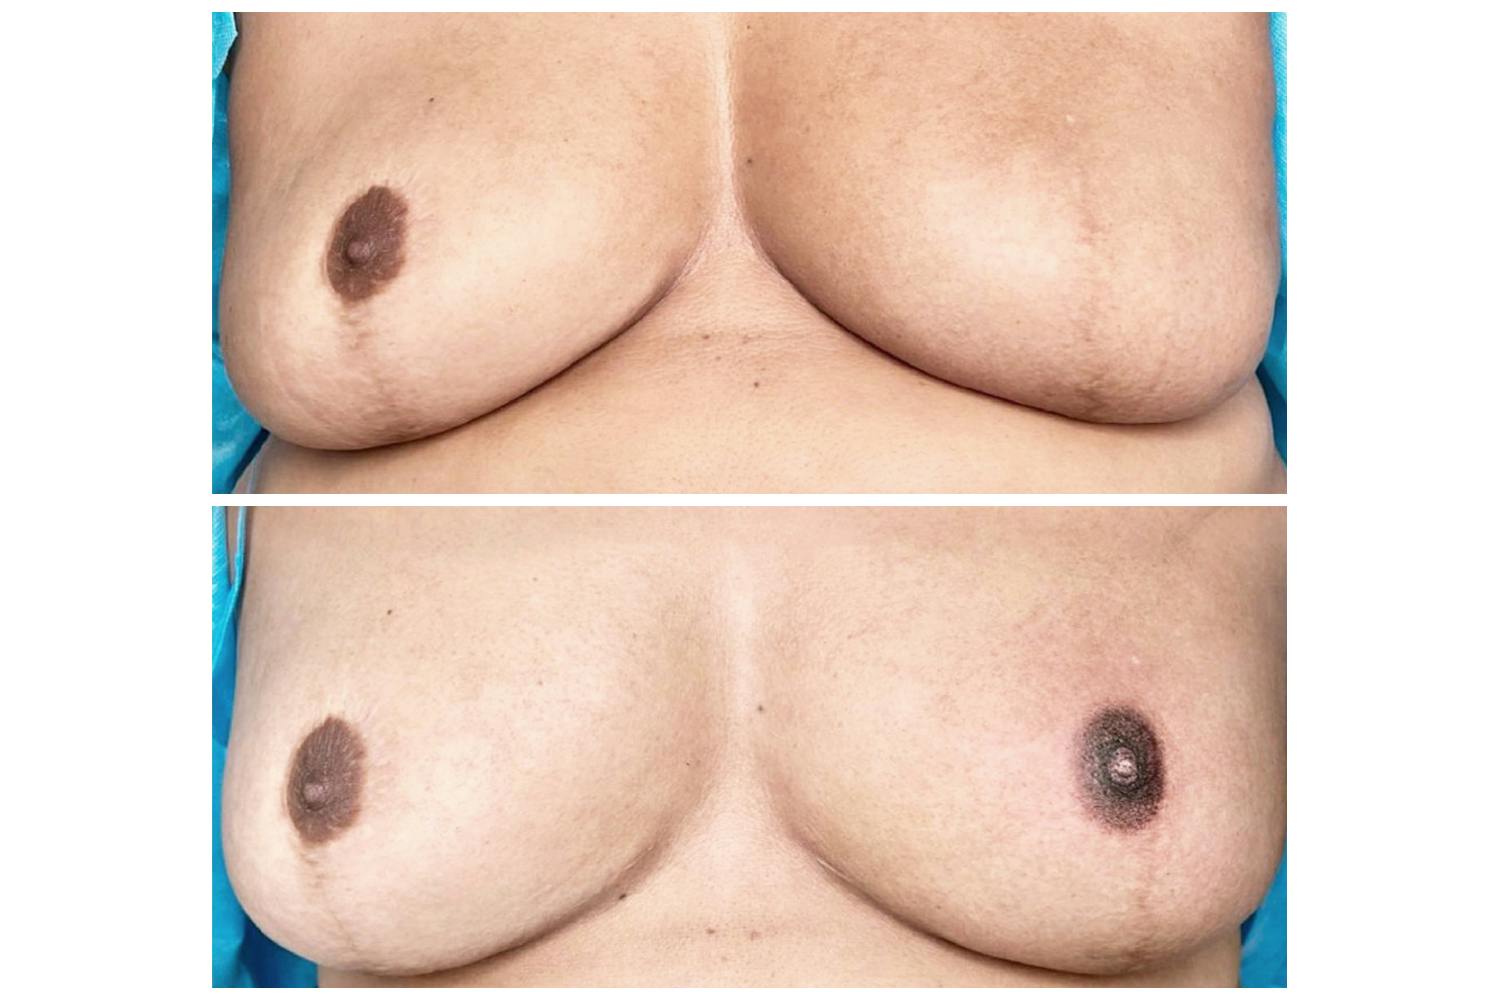 The focus of the PhiAreola treatment is to adapt to the new shape, size, texture, color and position on the chest. PhiAreola also removes scars from previous breast surgeries.